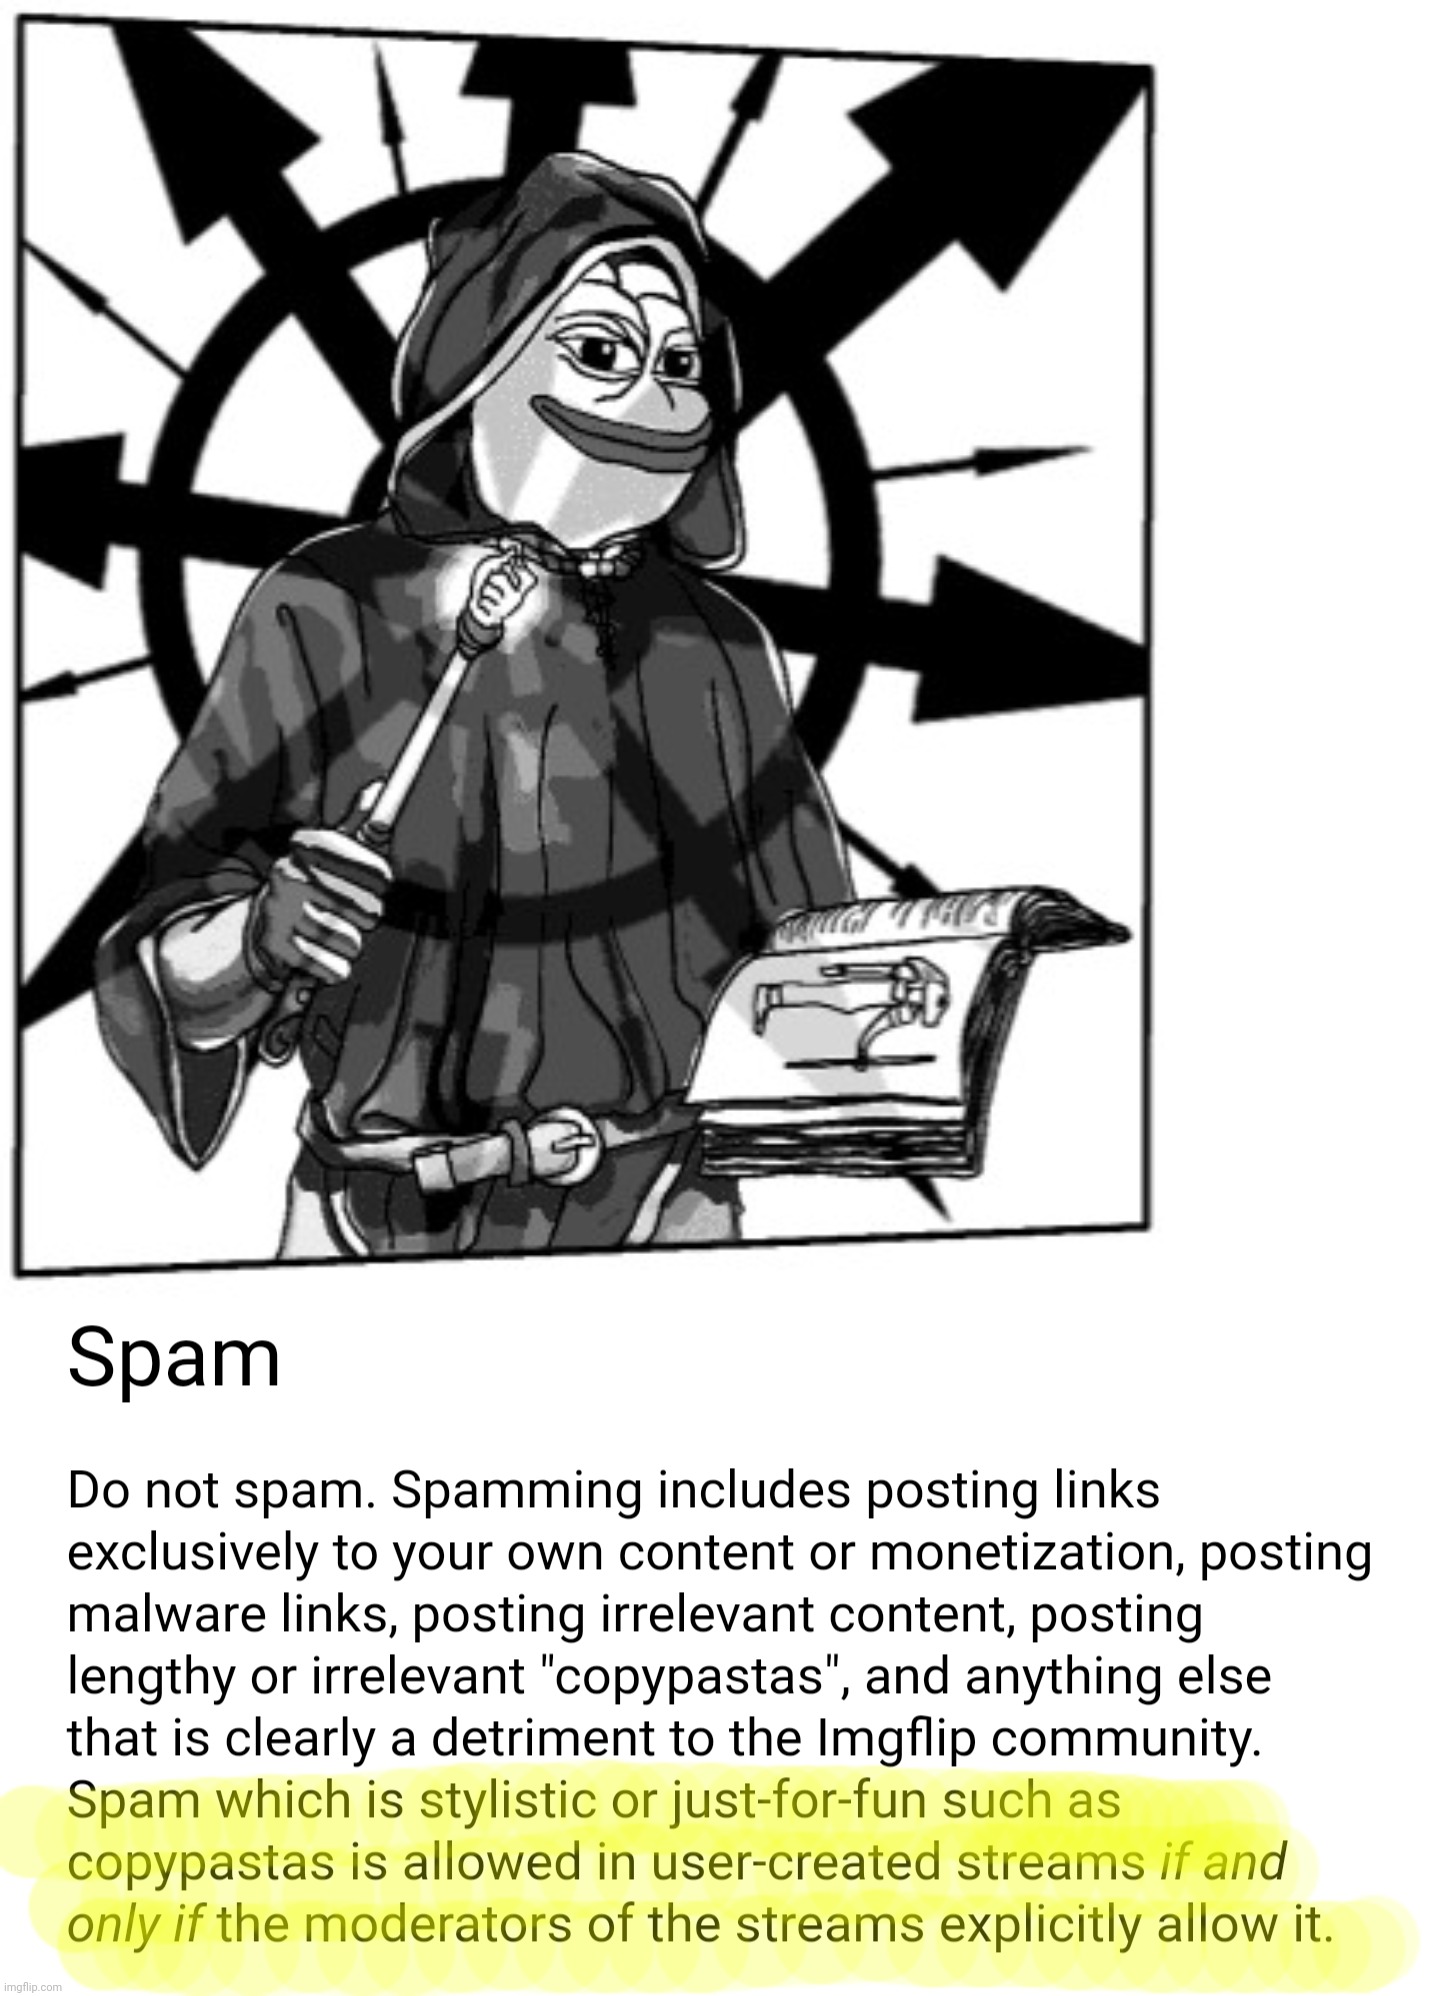 PEPE PARTY PROPOSES I_P FREE SPEECH LEGISLATION TERMS OF USE ALLOW STREAMS TO HOST STYLISTIC AND JUST-FOR-FUN SPAM | image tagged in pepe party,proposal,legislation,spam,free speech,censorship | made w/ Imgflip meme maker